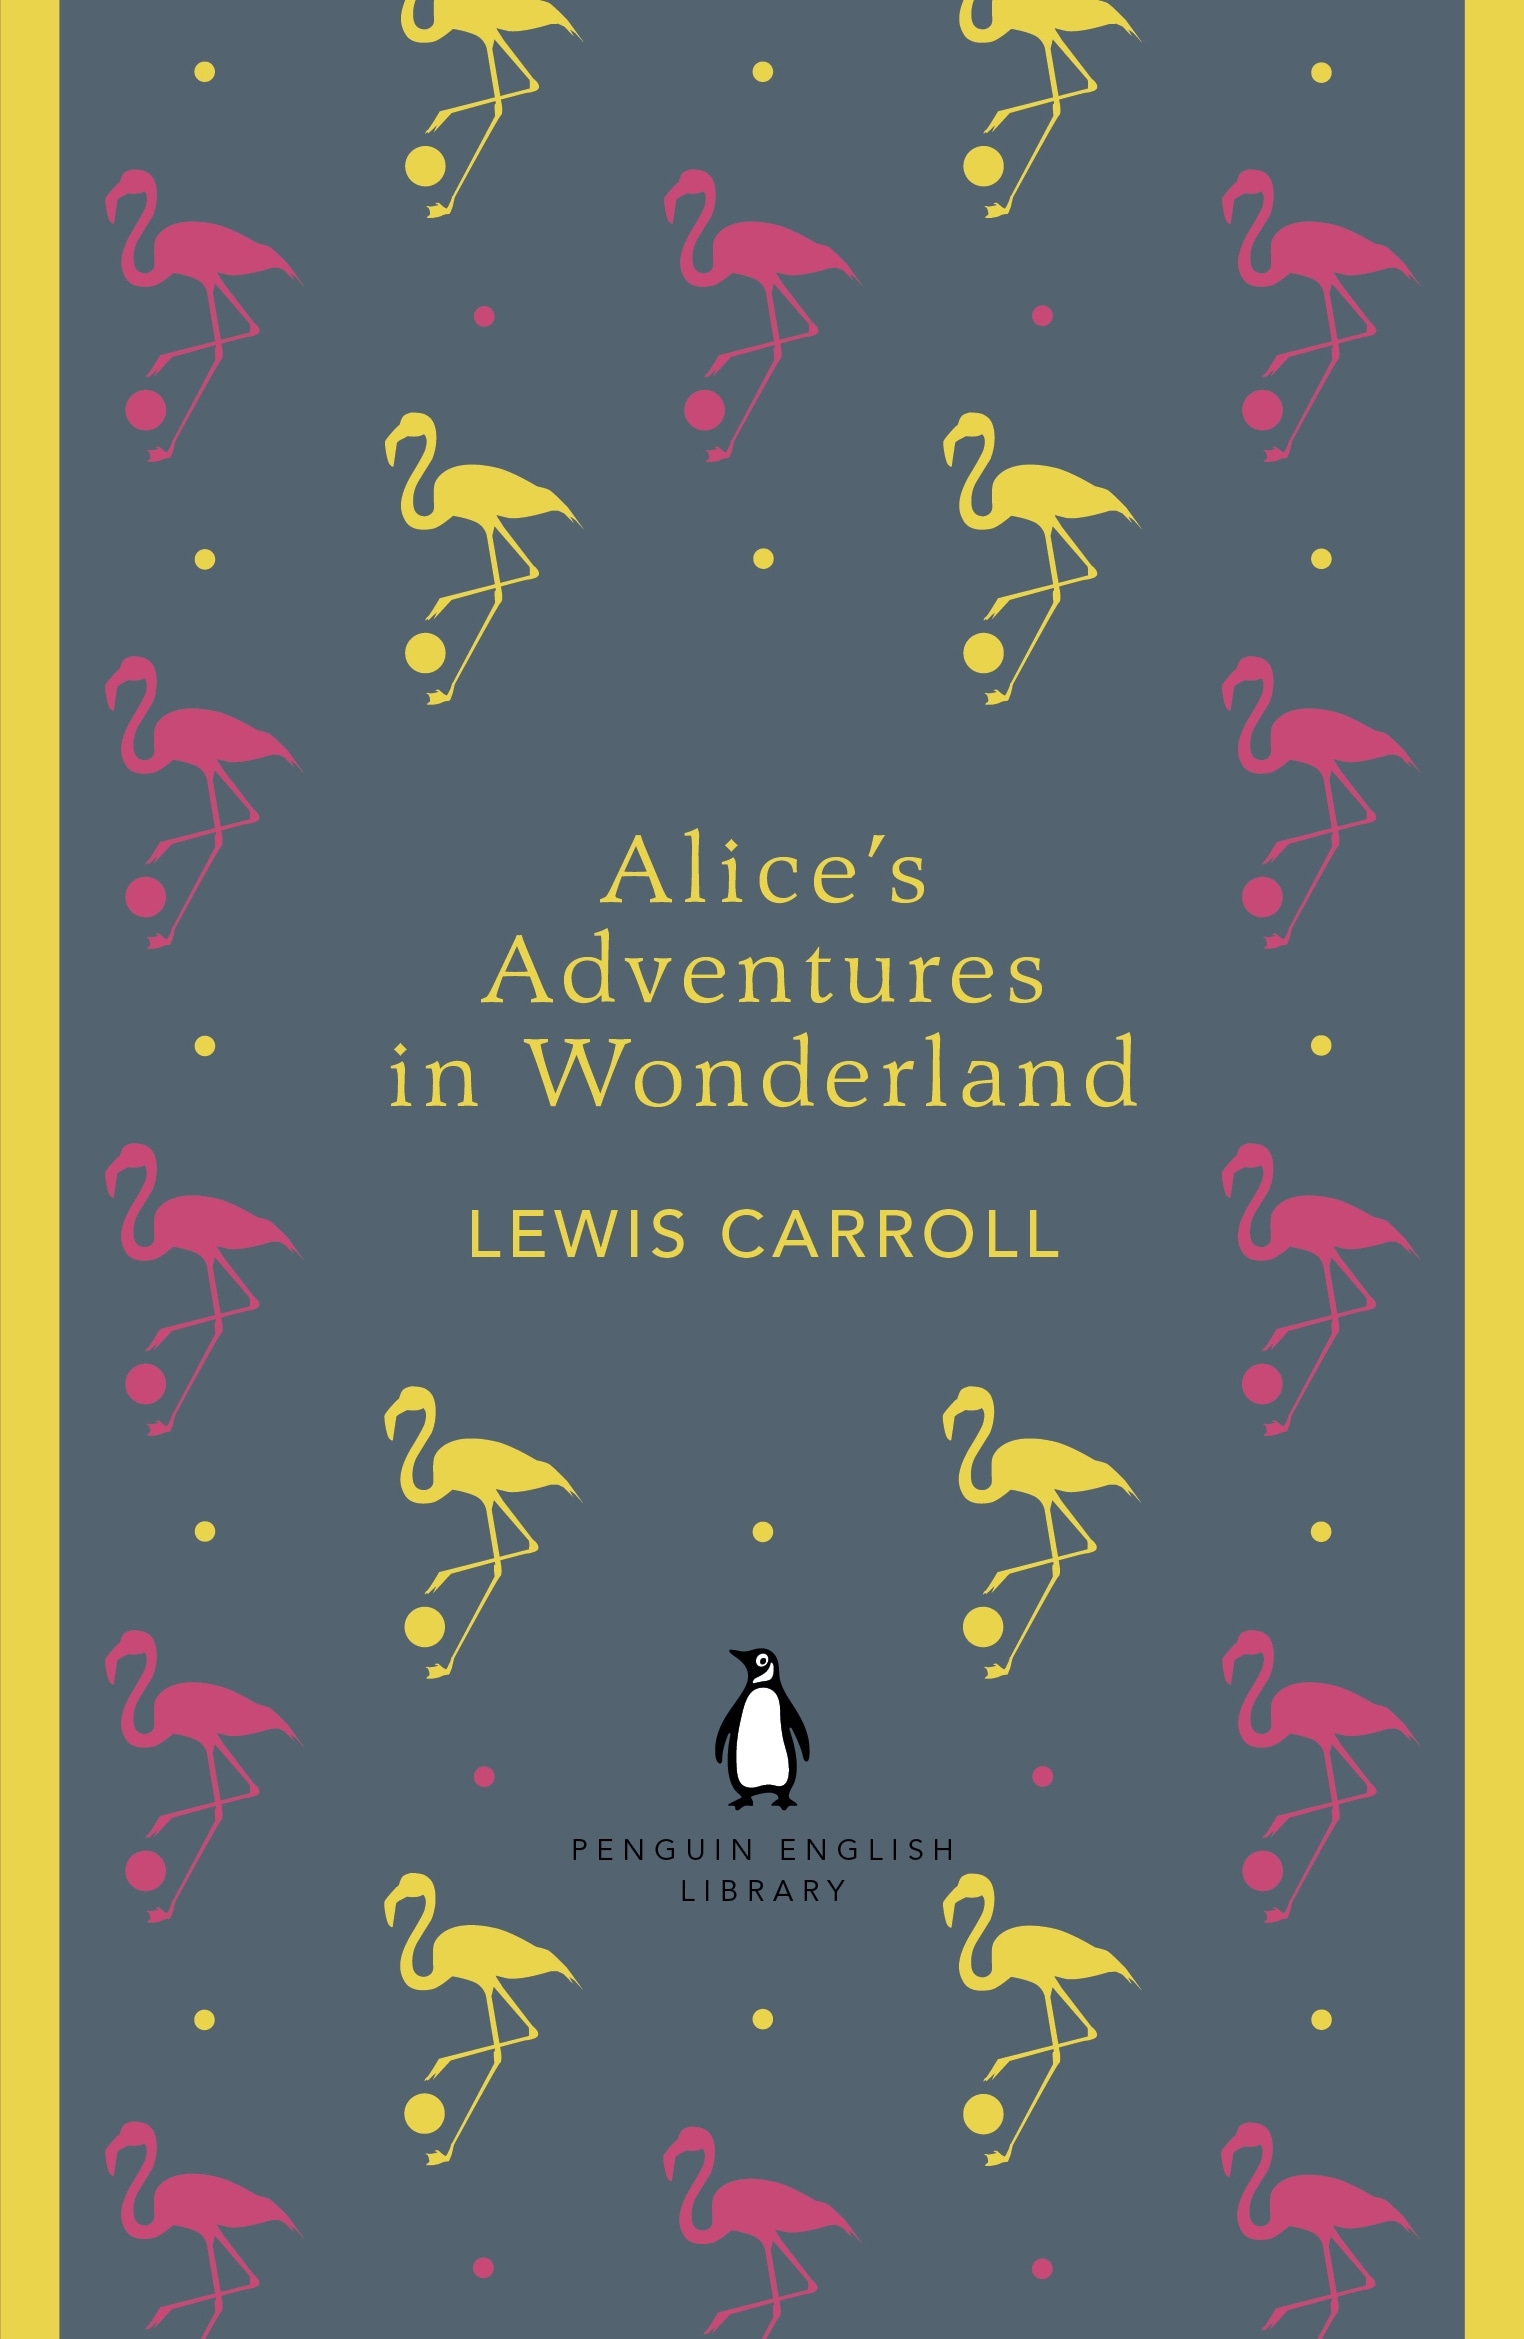 Book “Alice's Adventures in Wonderland and Through the Looking Glass” by Lewis Carroll — August 30, 2012